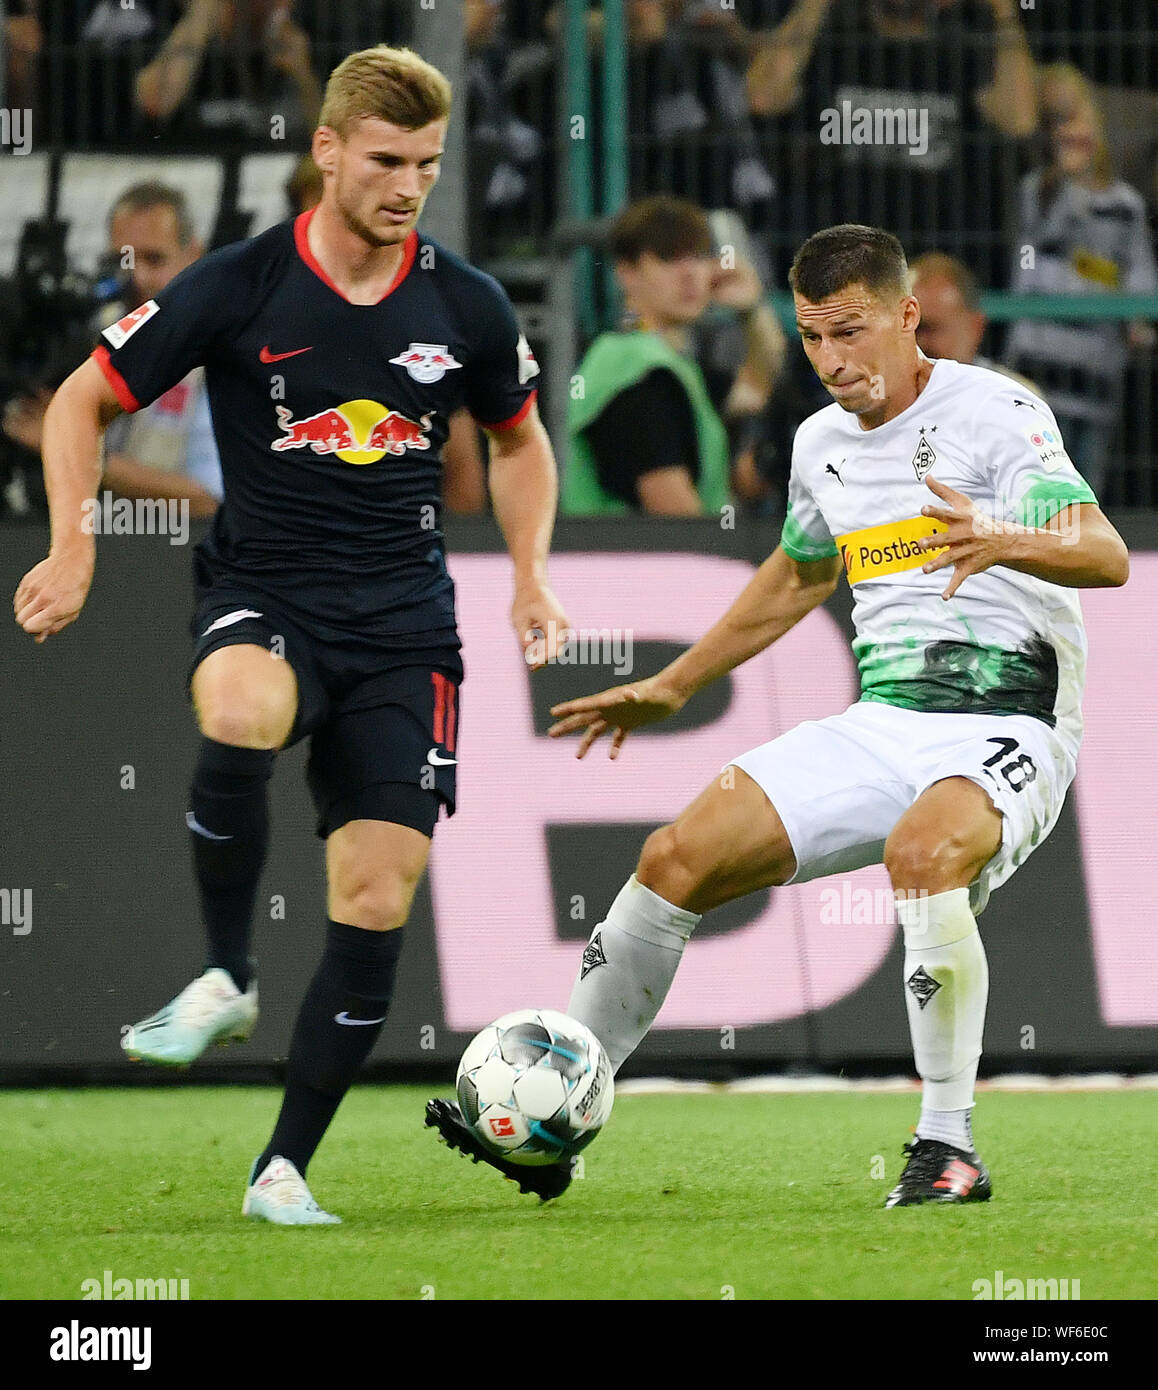 (190831) -- MOENCHENGLADBACH, Aug. 31, 2019 (Xinhua) -- Timo Werner (L) of Leipzig vies with Stefan Lainer of Moenchengladbach during the Bundesliga soccer match between Borussia Moenchengladbach and RB Leipzig in Moenchengladbach, Germany, Aug. 30, 2019. Stock Photo